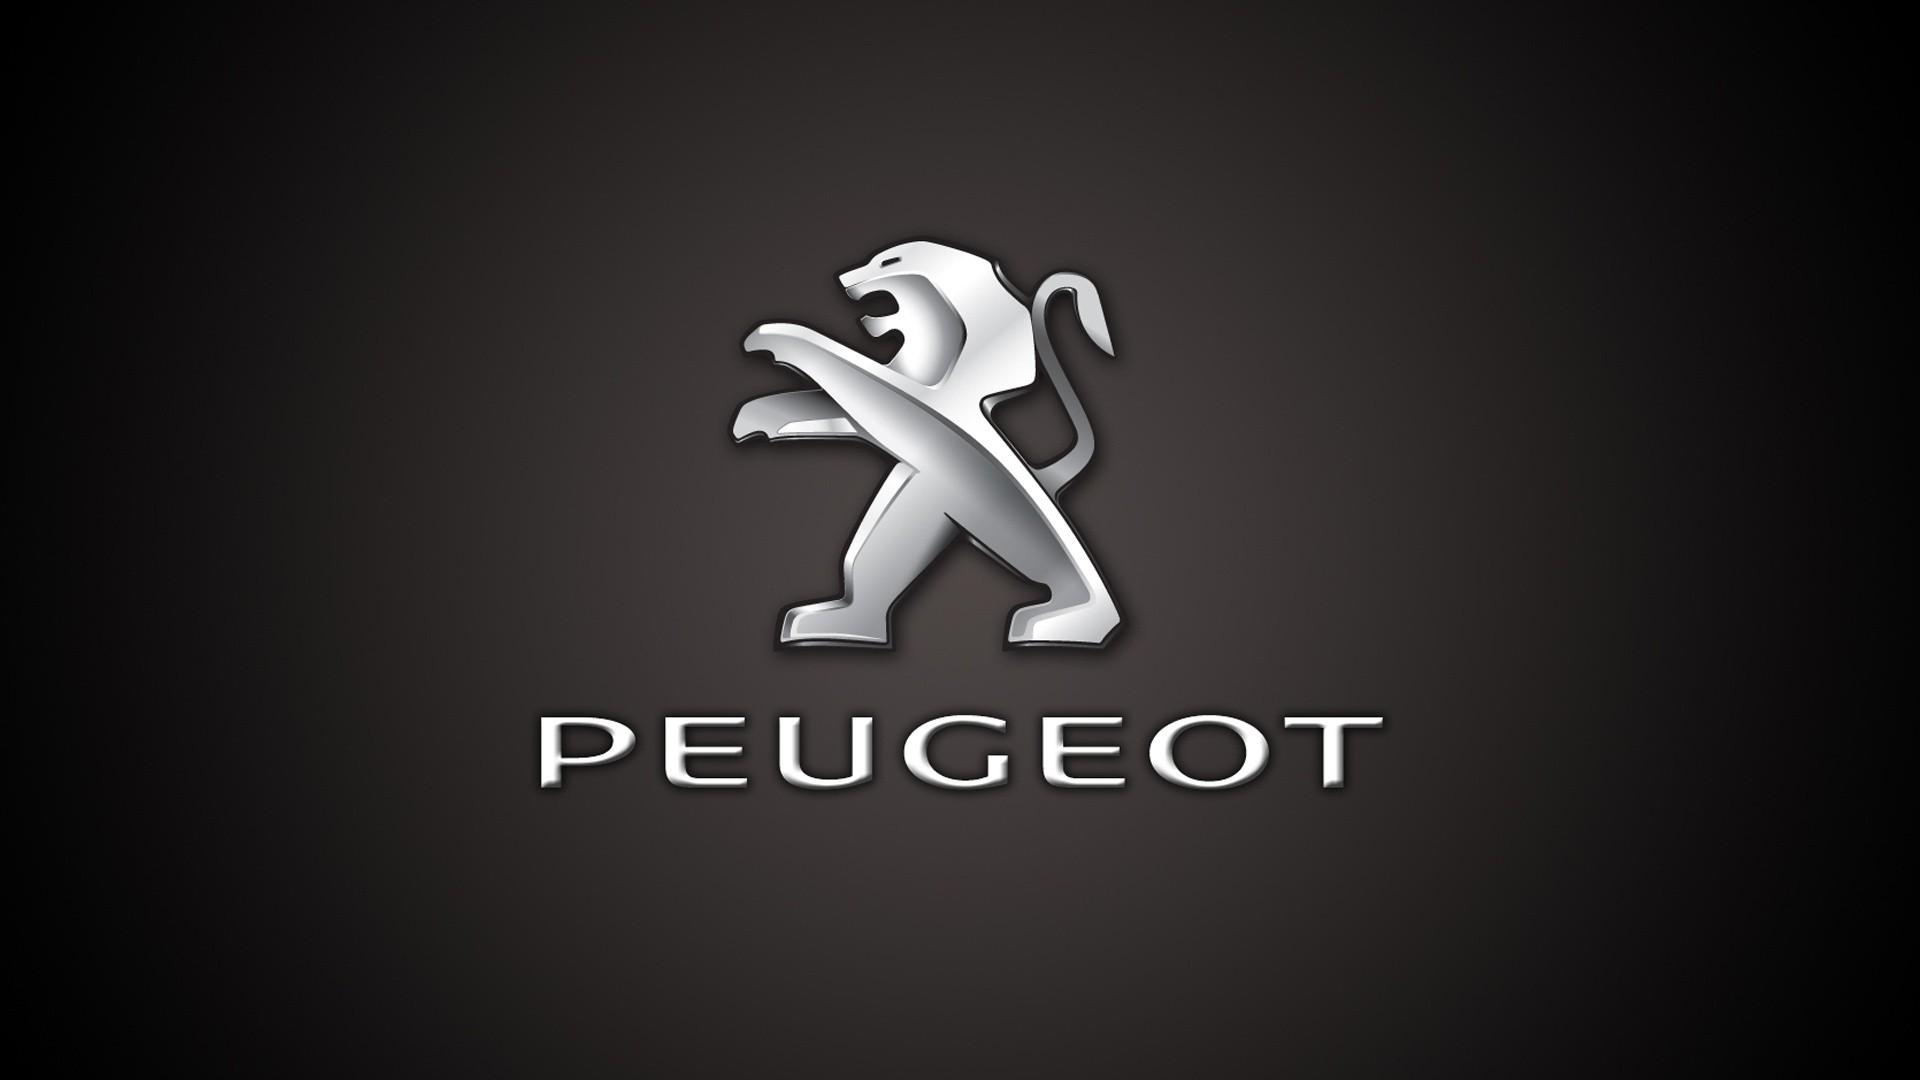 Peugeot Car Service and Repair Specialist